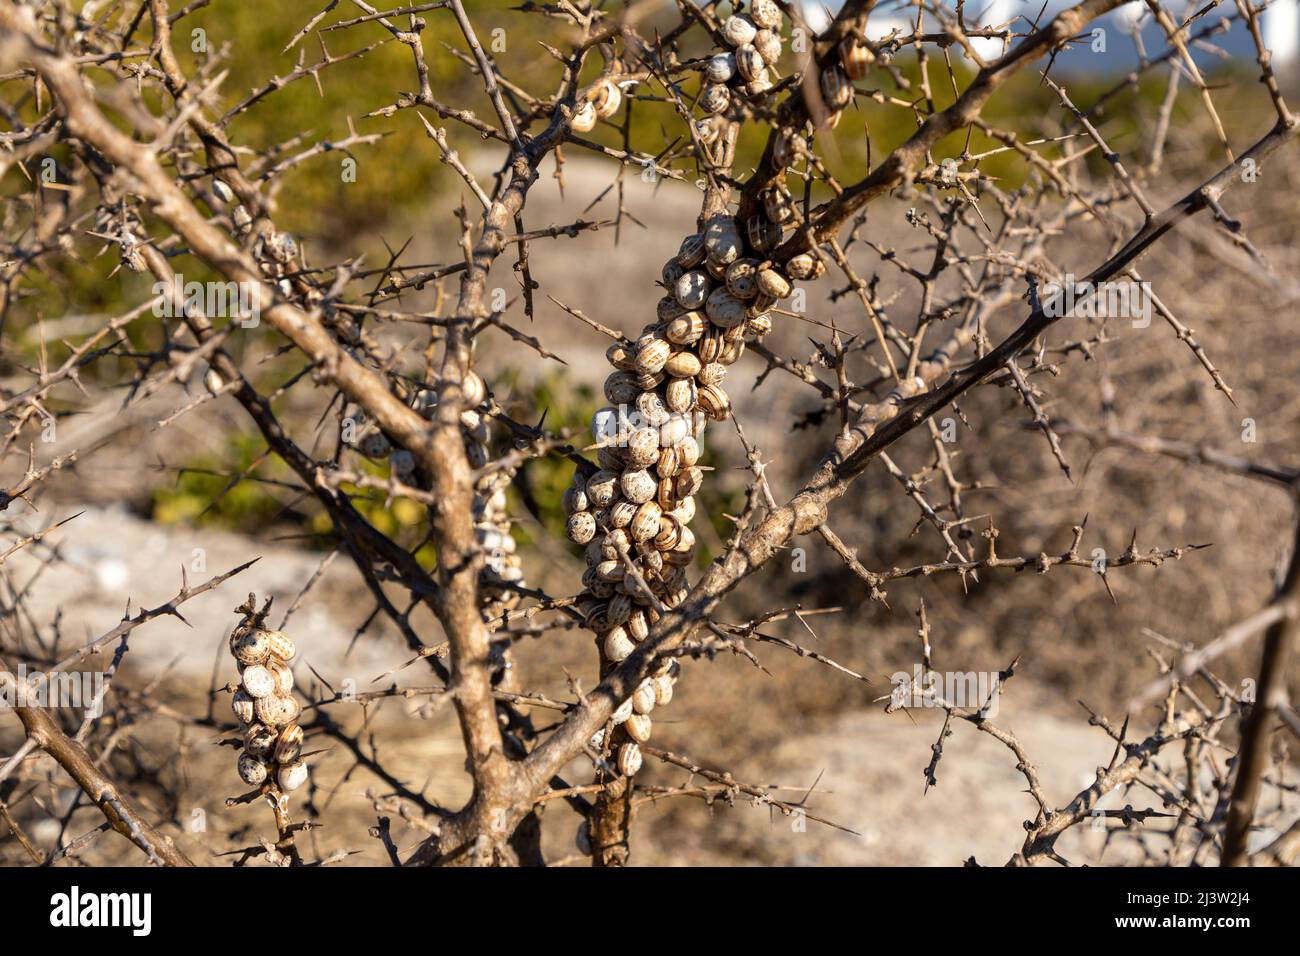 Branches of a plant without any leaves, a bunch of snails attached to the branch Stock Photo